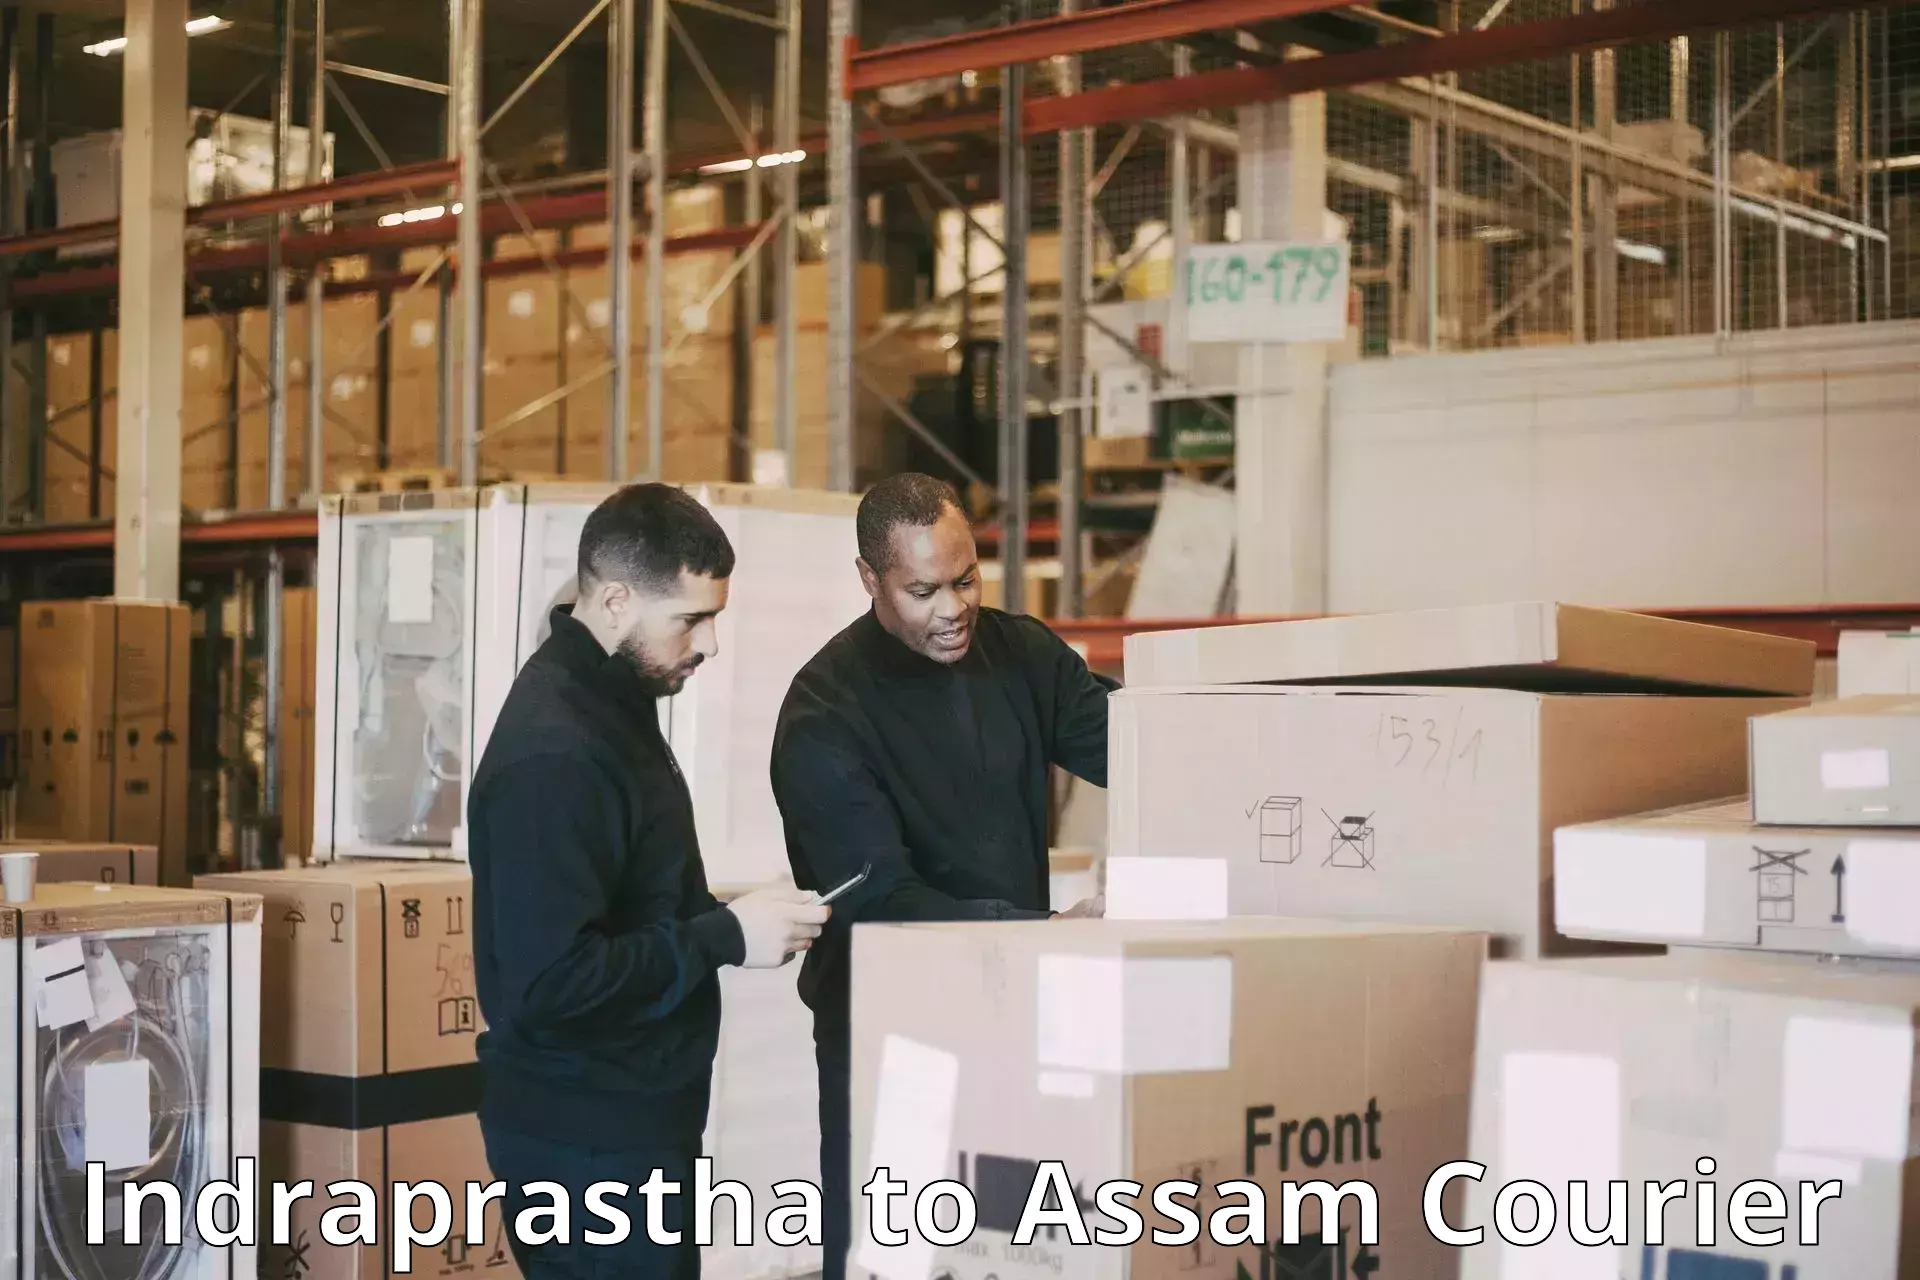 Courier service partnerships Indraprastha to Morigaon